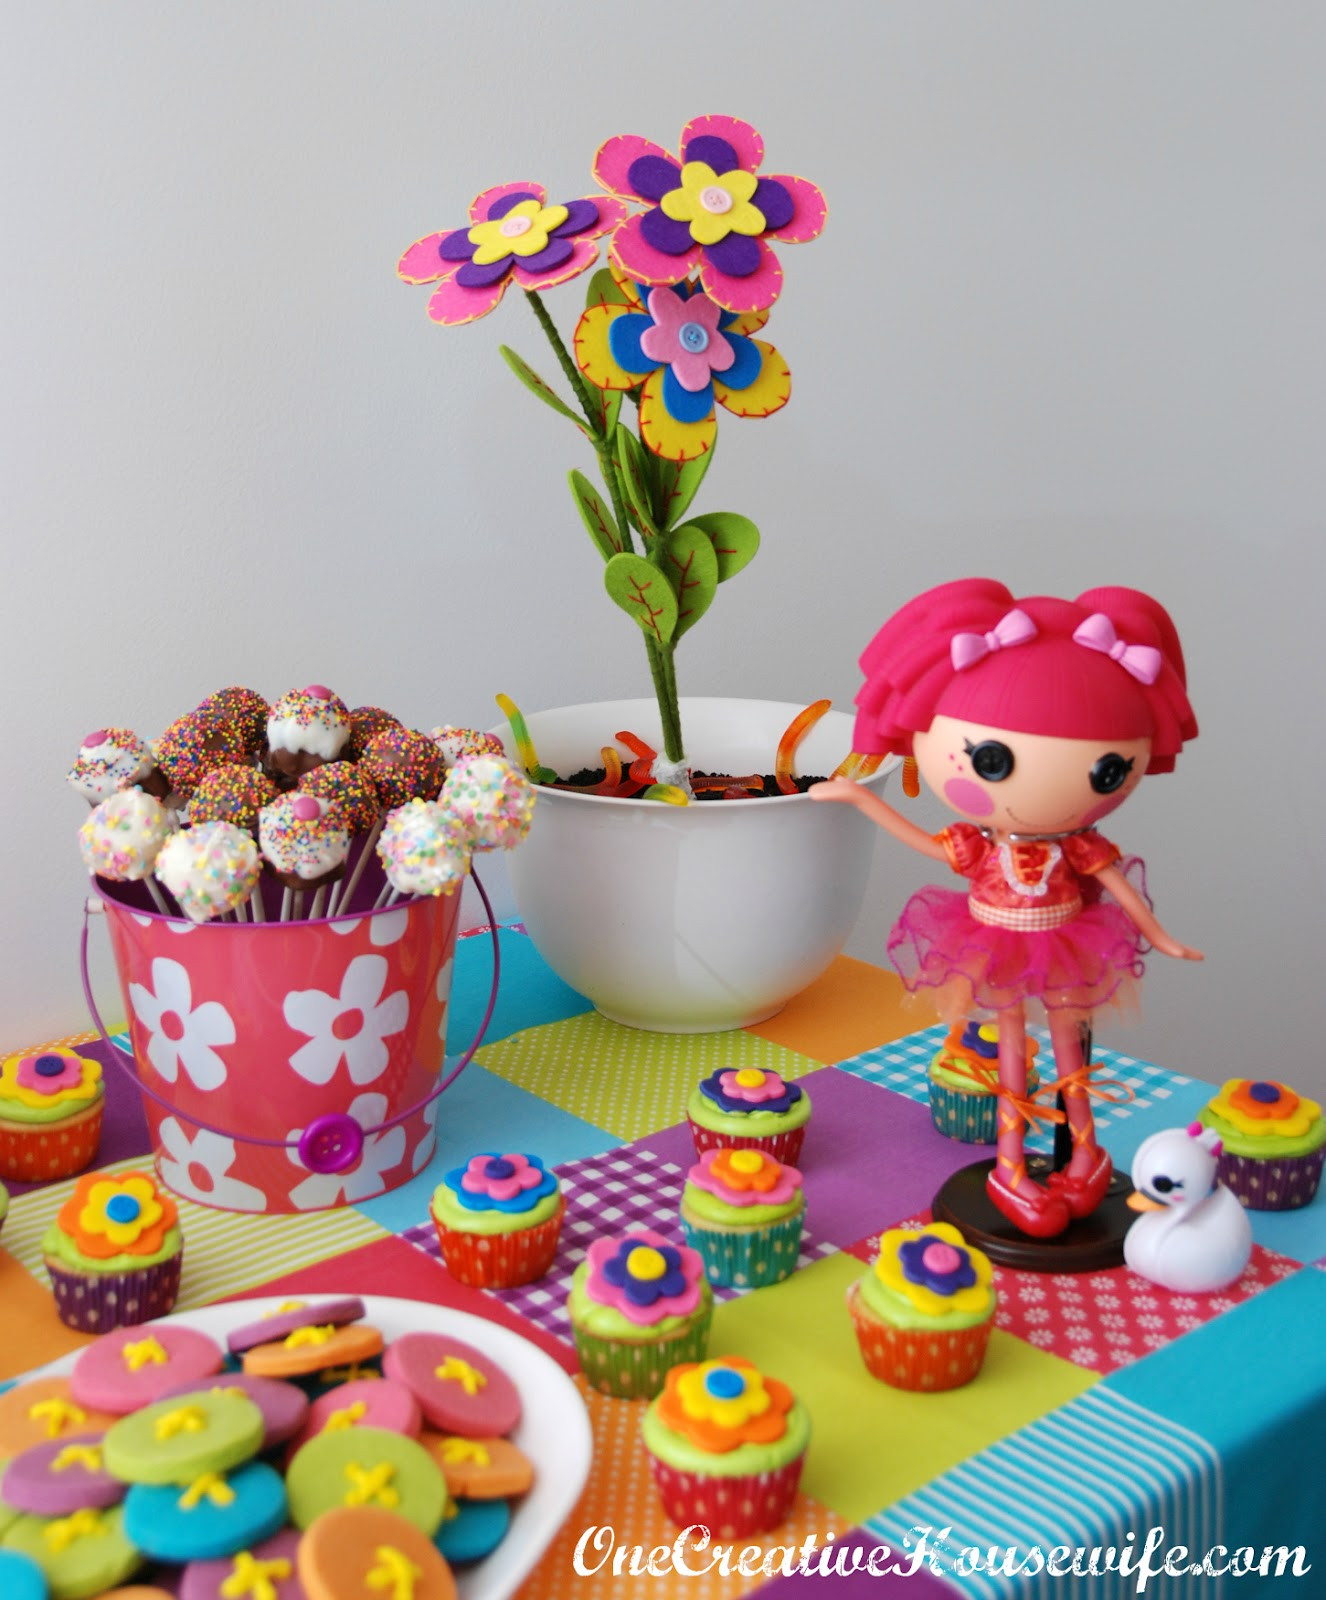 Lalaloopsy Birthday Party
 e Creative Housewife Lalaloopsy Birthday Party